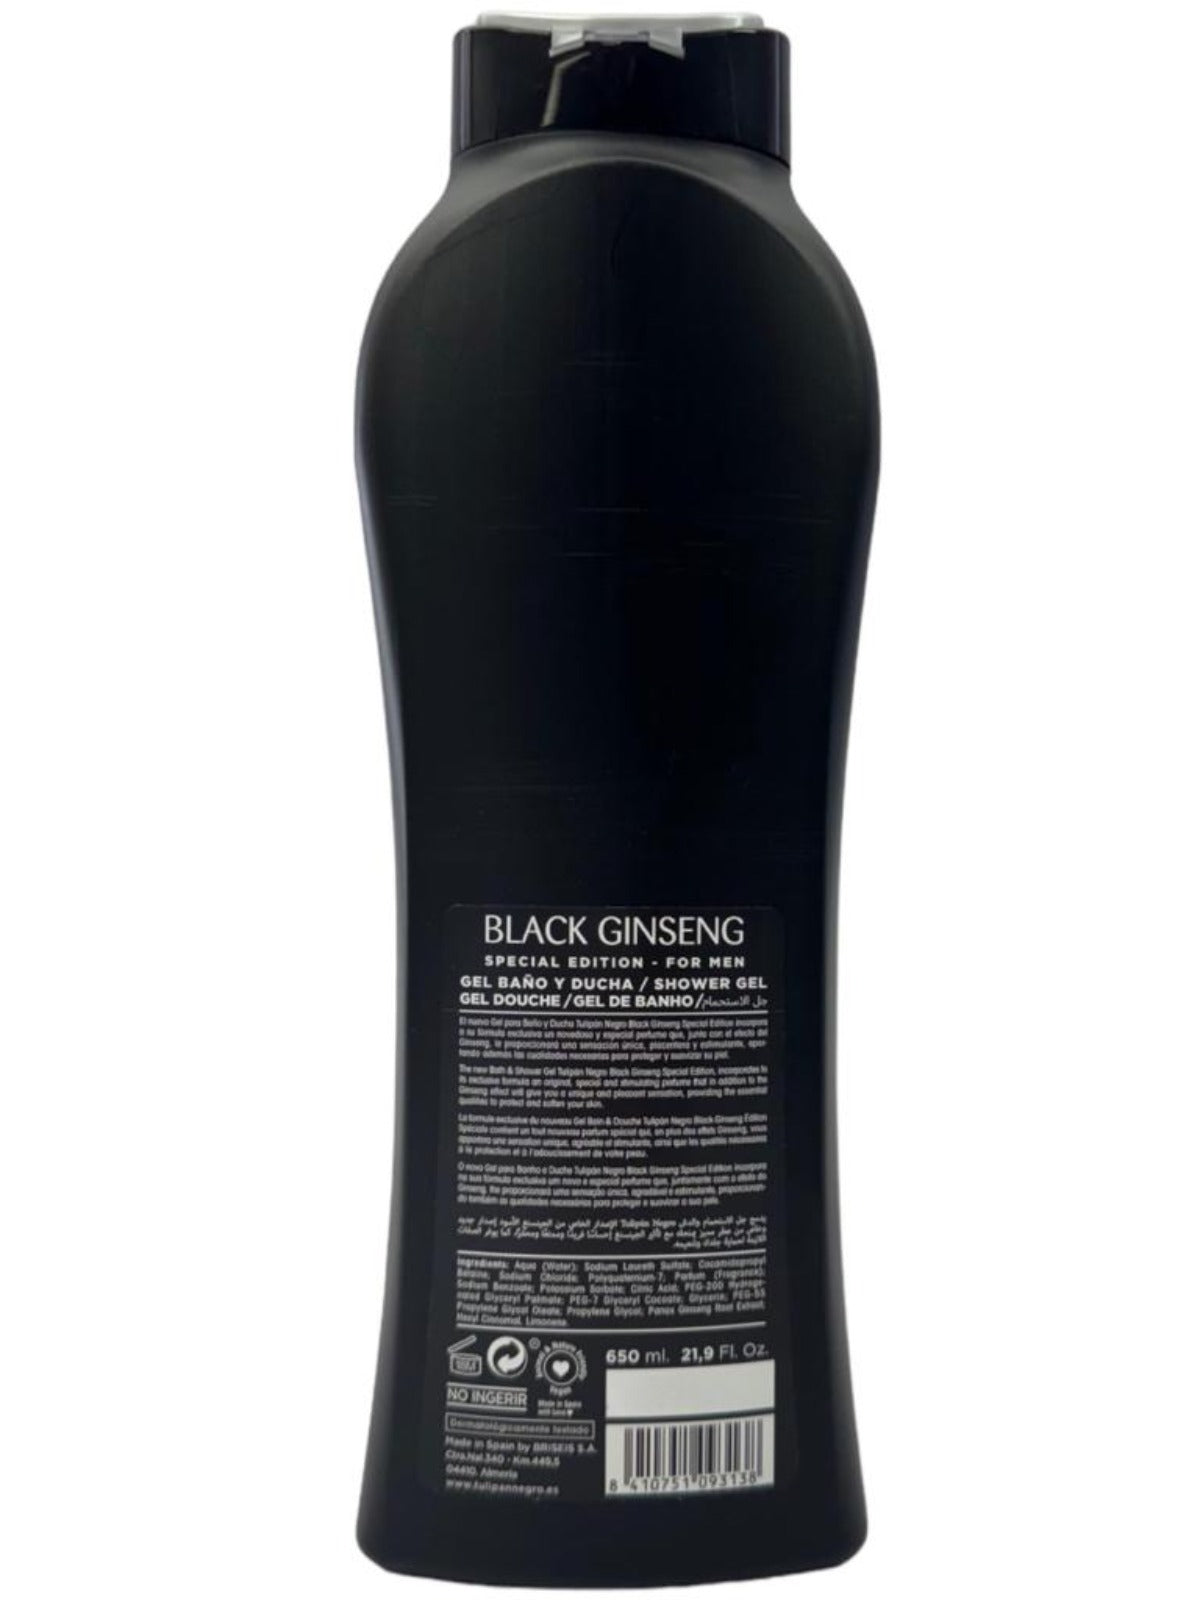 Tulipan Negro Black Ginseng Special Edition Spanish Bath And Shower Gel 650ml